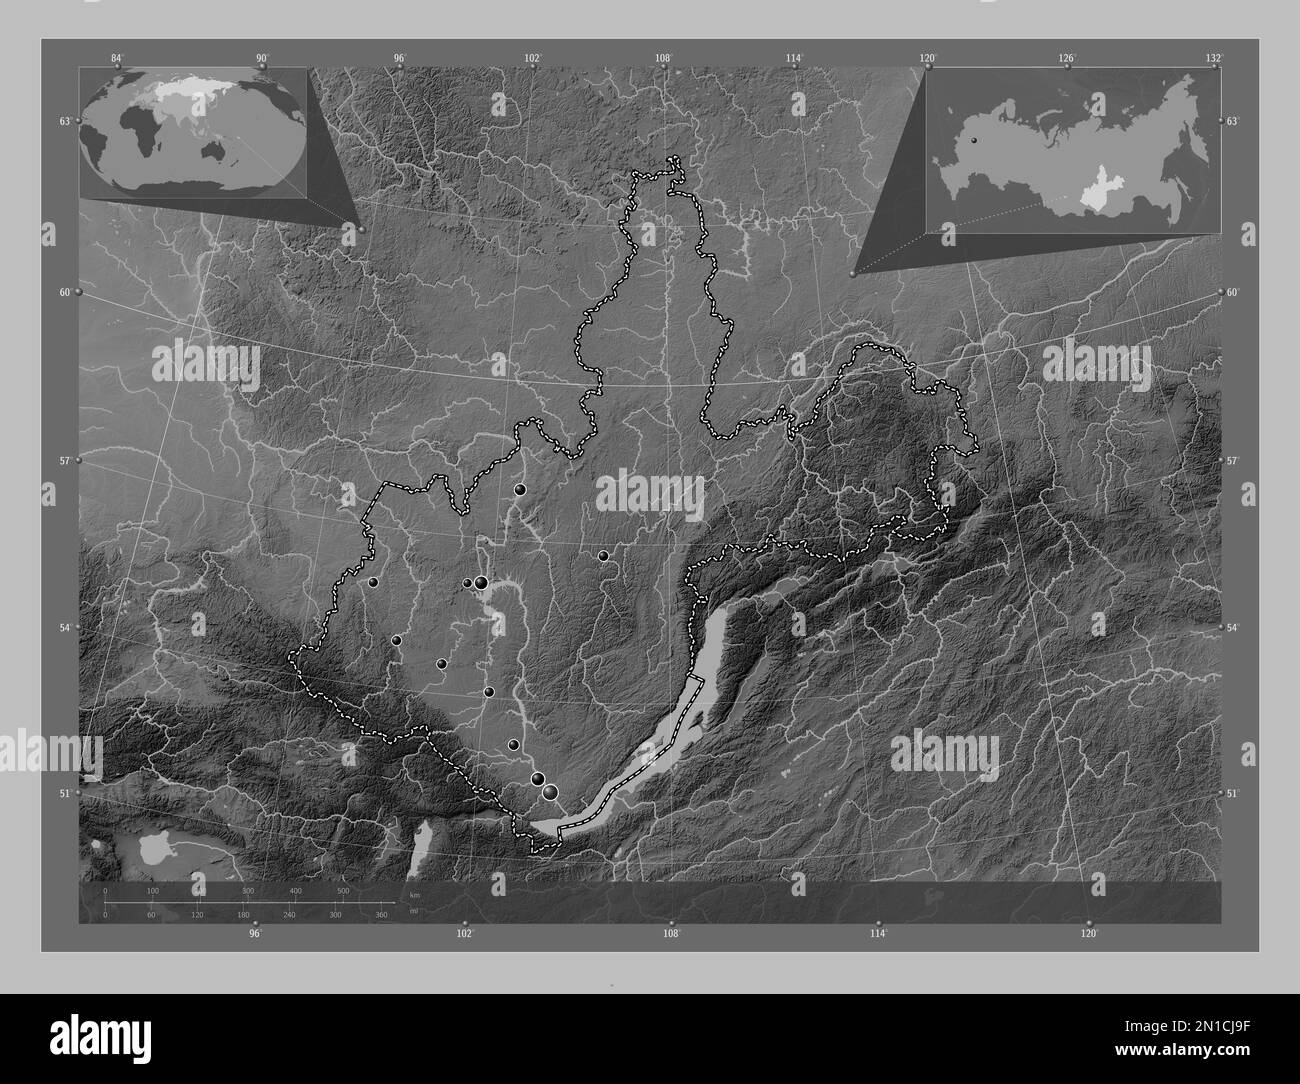 Irkutsk, region of Russia. Grayscale elevation map with lakes and rivers. Locations of major cities of the region. Corner auxiliary location maps Stock Photo